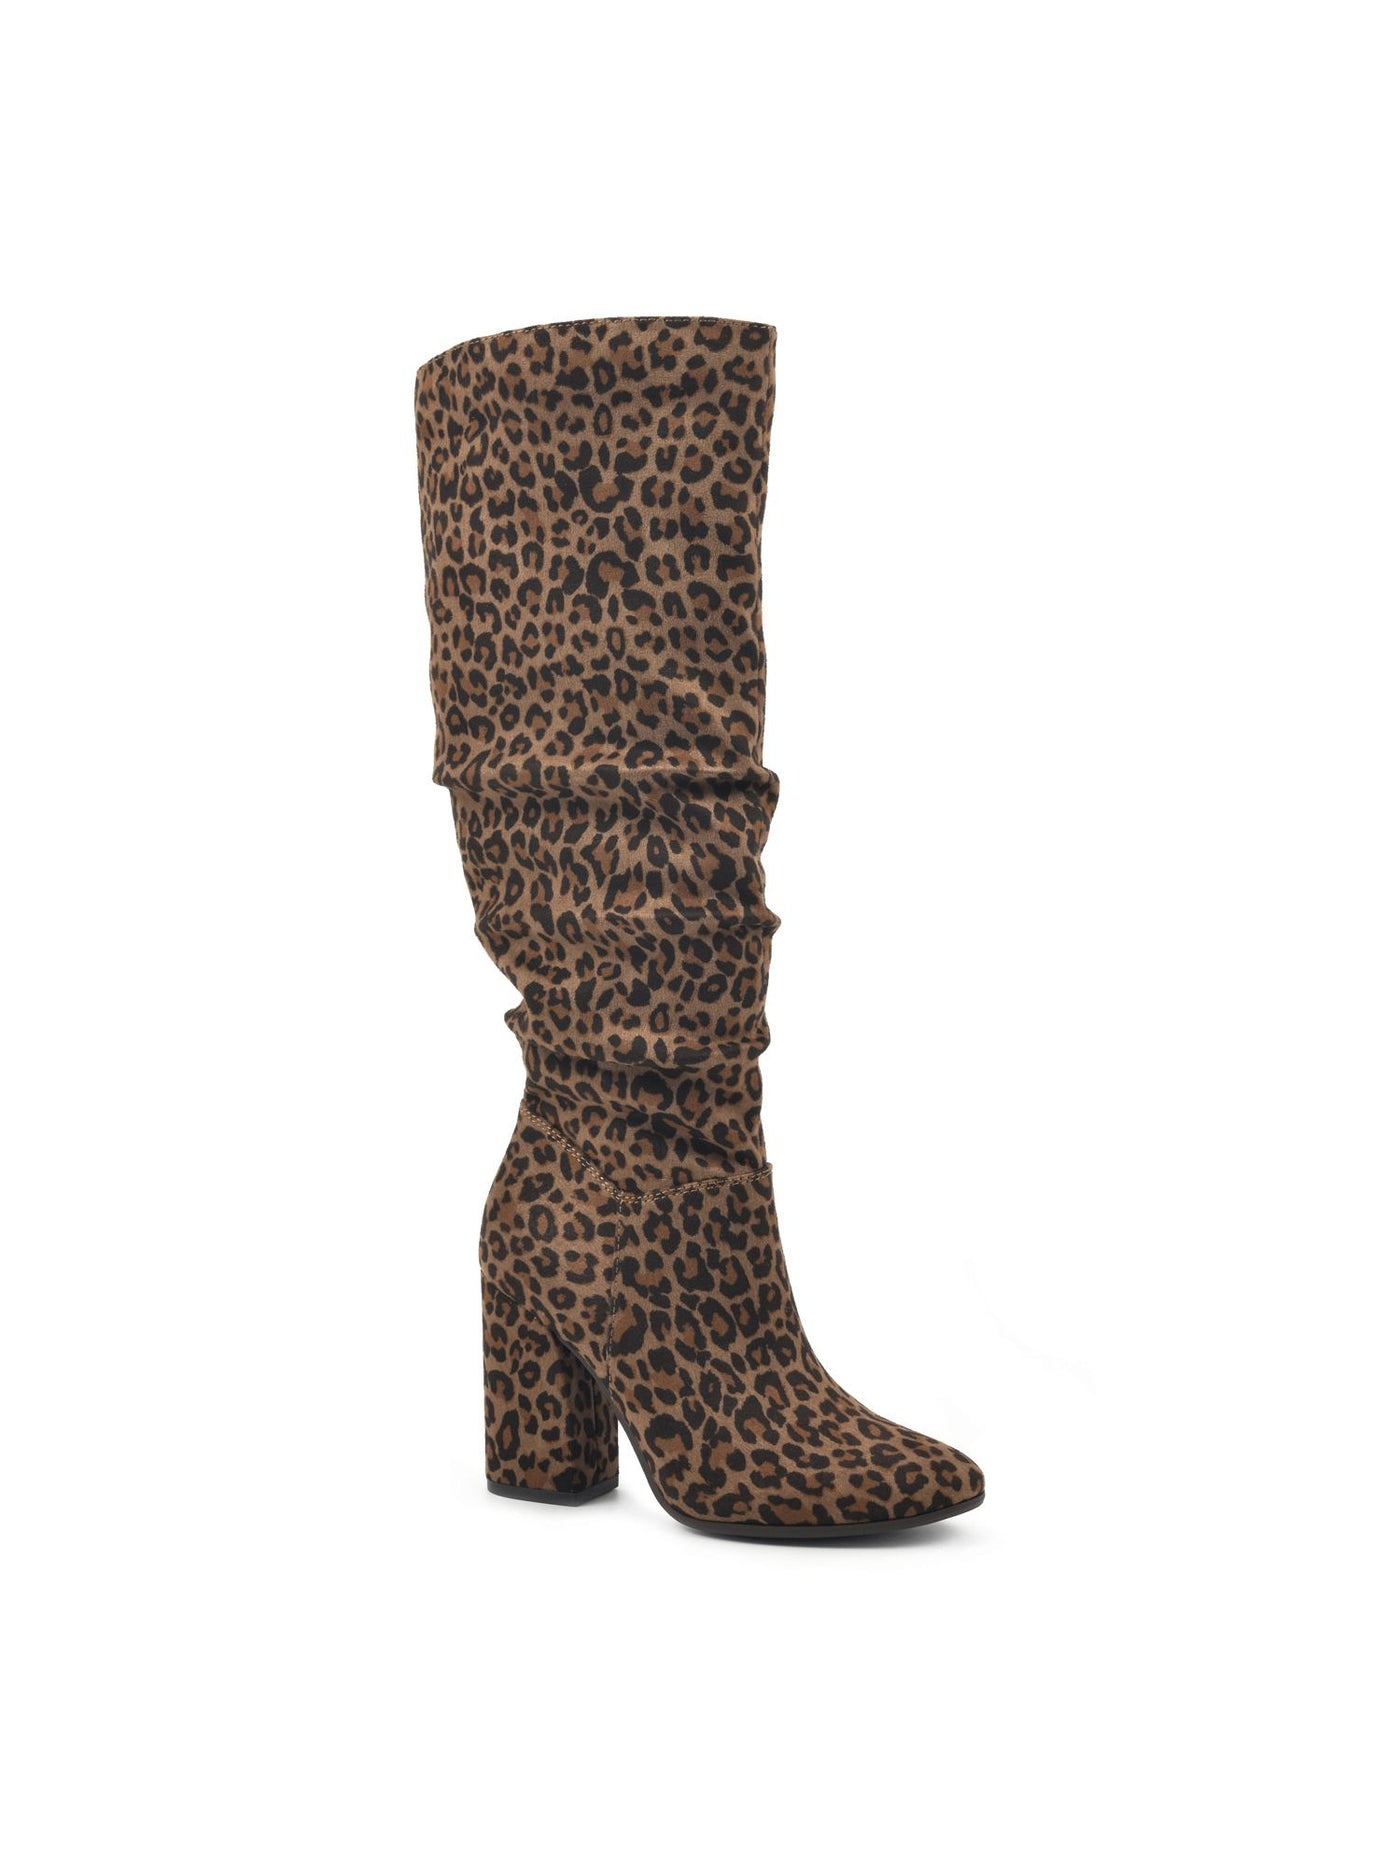 SEVEN DIALS Womens Brown Animal Print Snake Print Cushioned Goring Adelyn Round Toe Block Heel Zip-Up Dress Slouch Boot 8 M